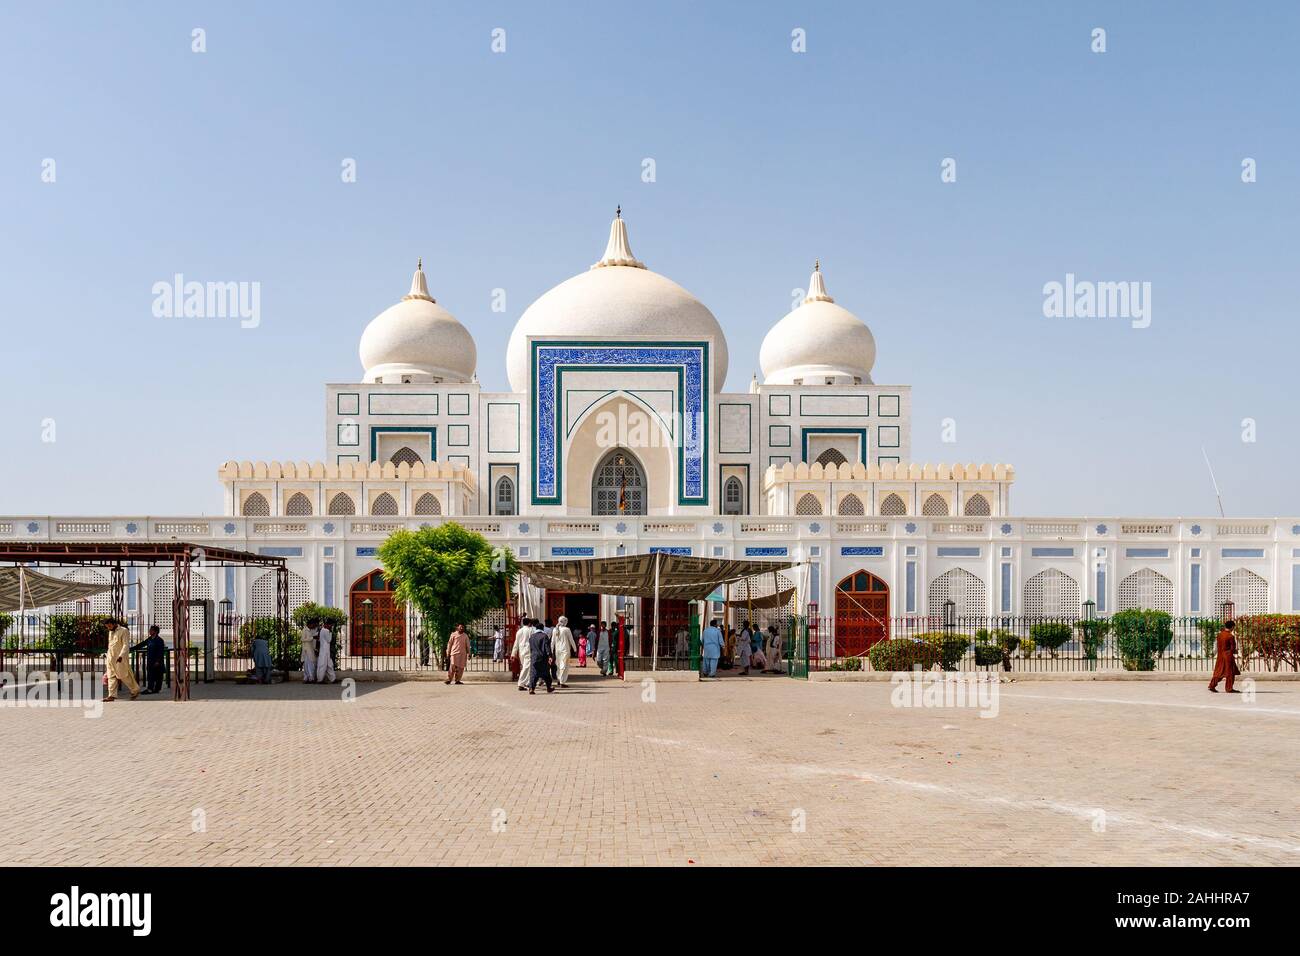 Larkana Bhutto Family Mausoleum Picturesque View with Visitors Entering and Exiting the Shrine on a Sunny Blue Sky Day Stock Photo